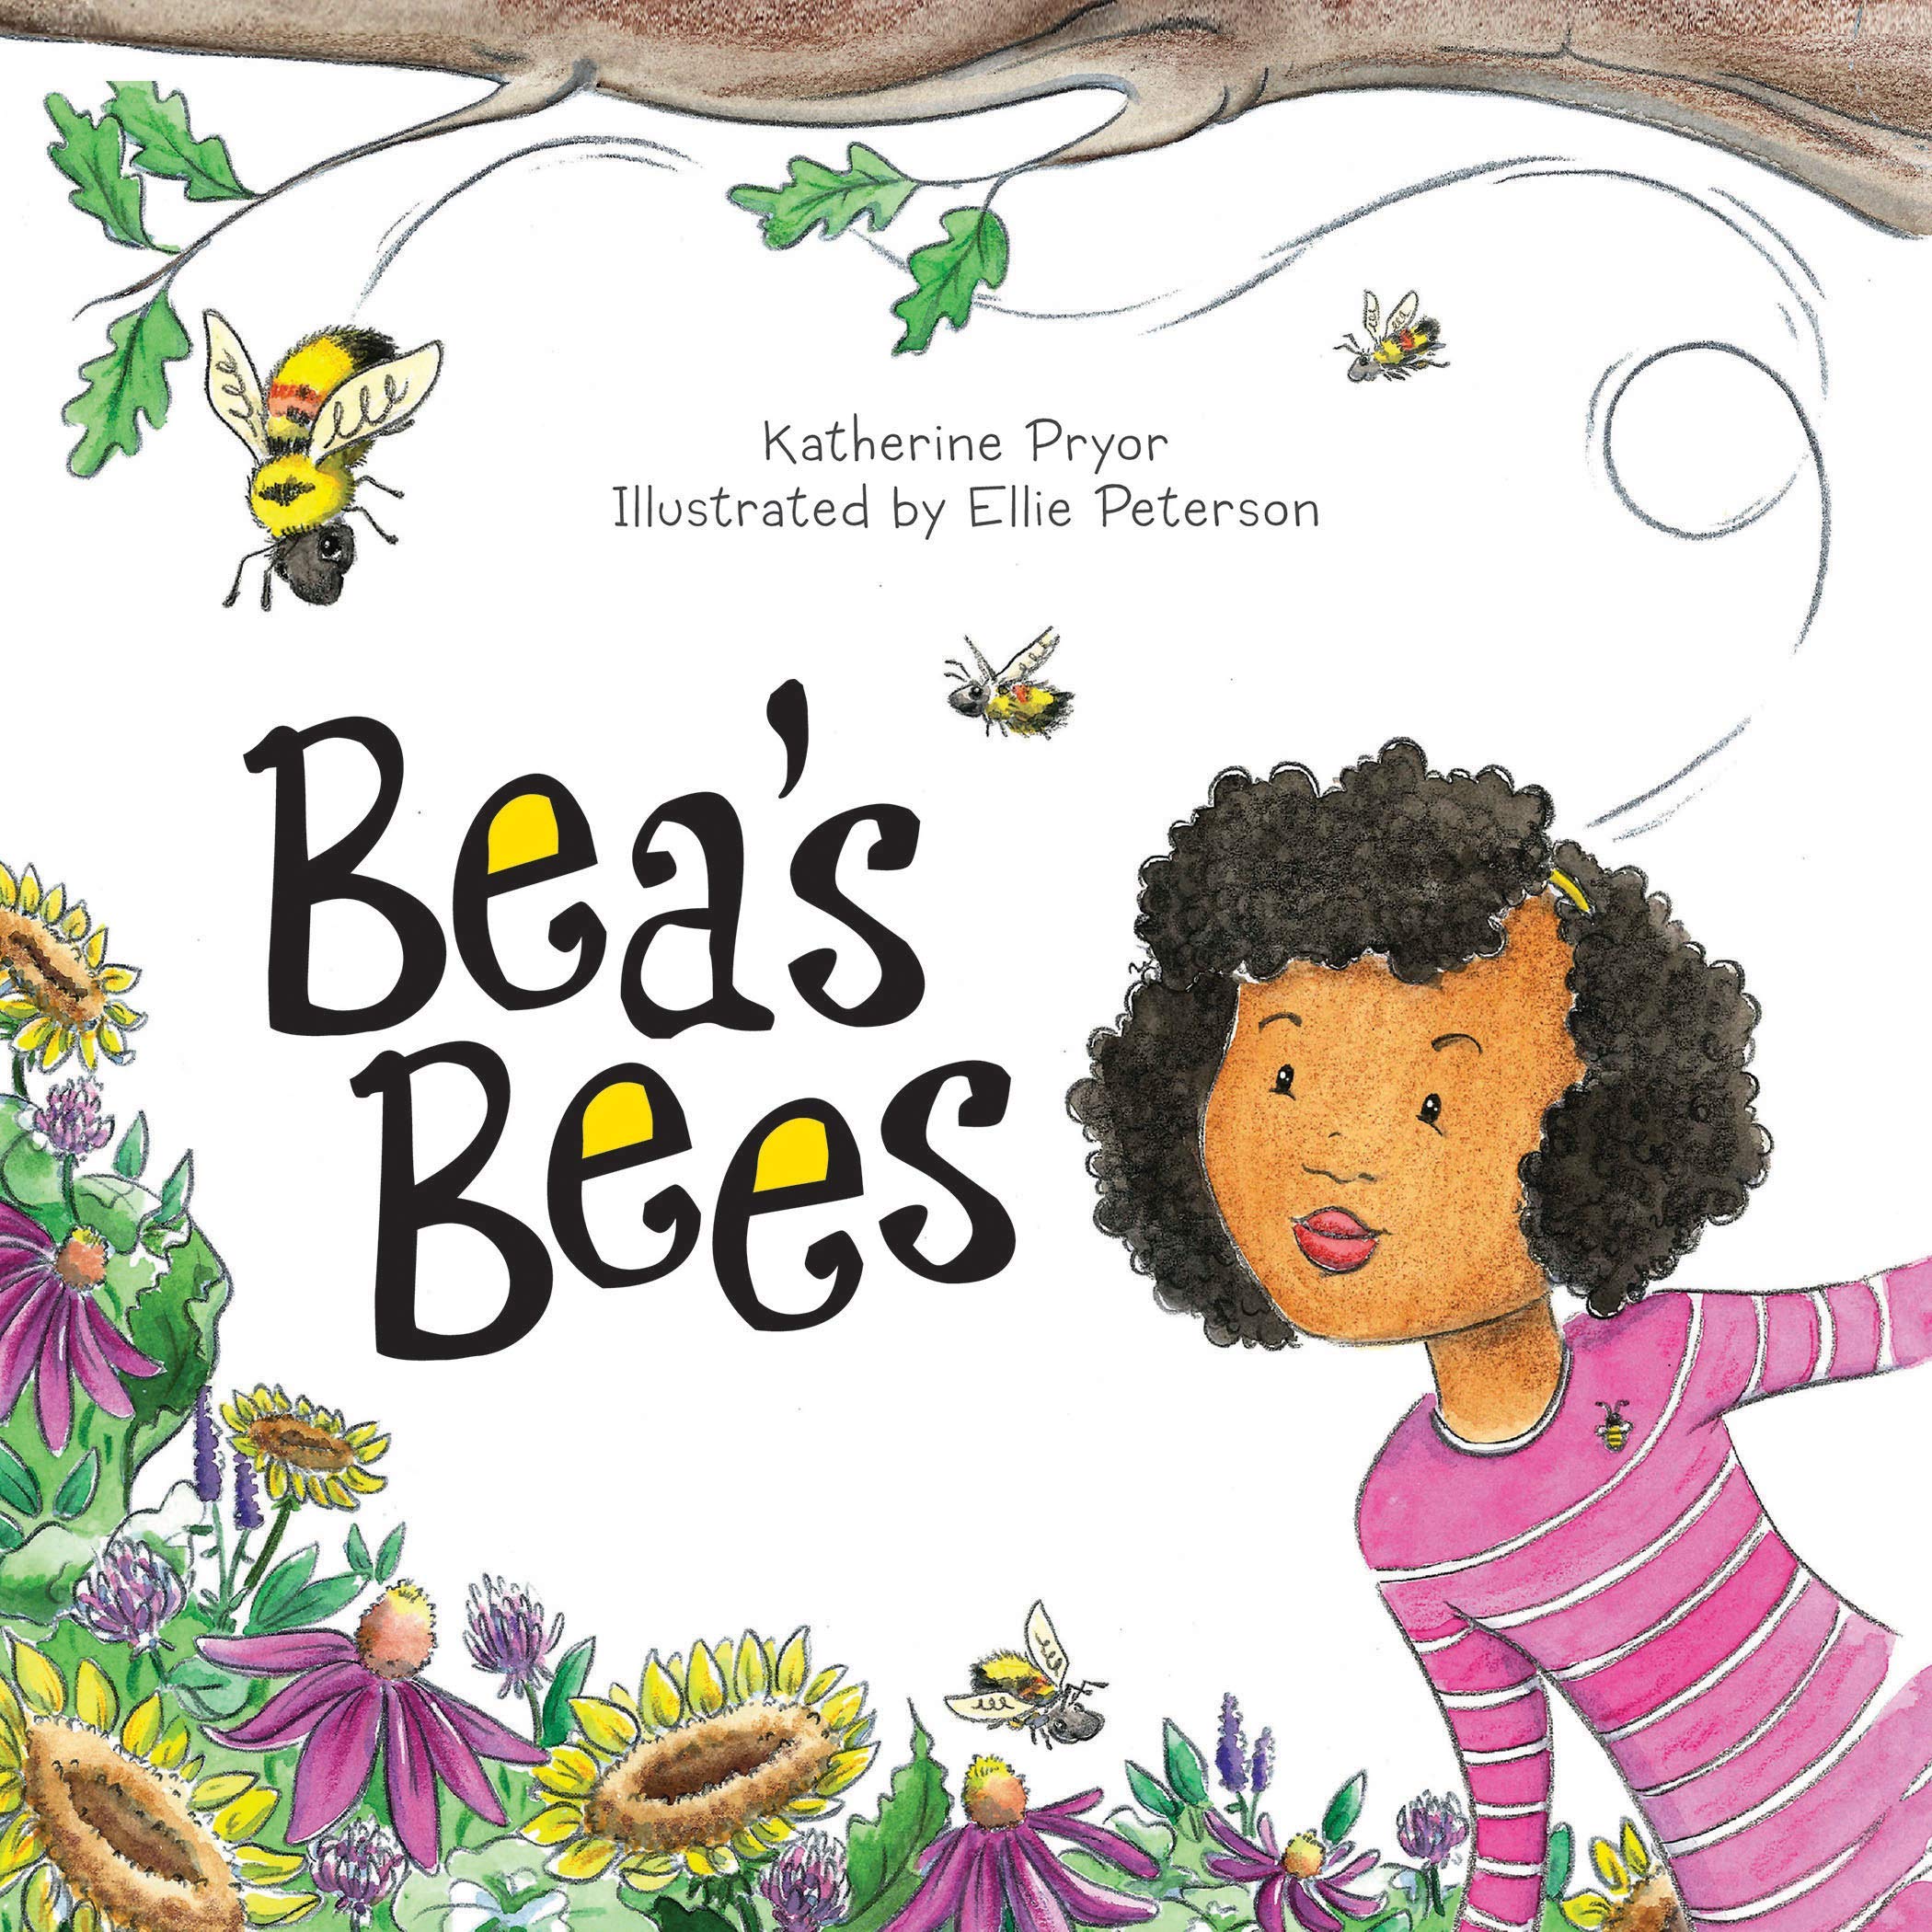 "Bea's Bees" book cover